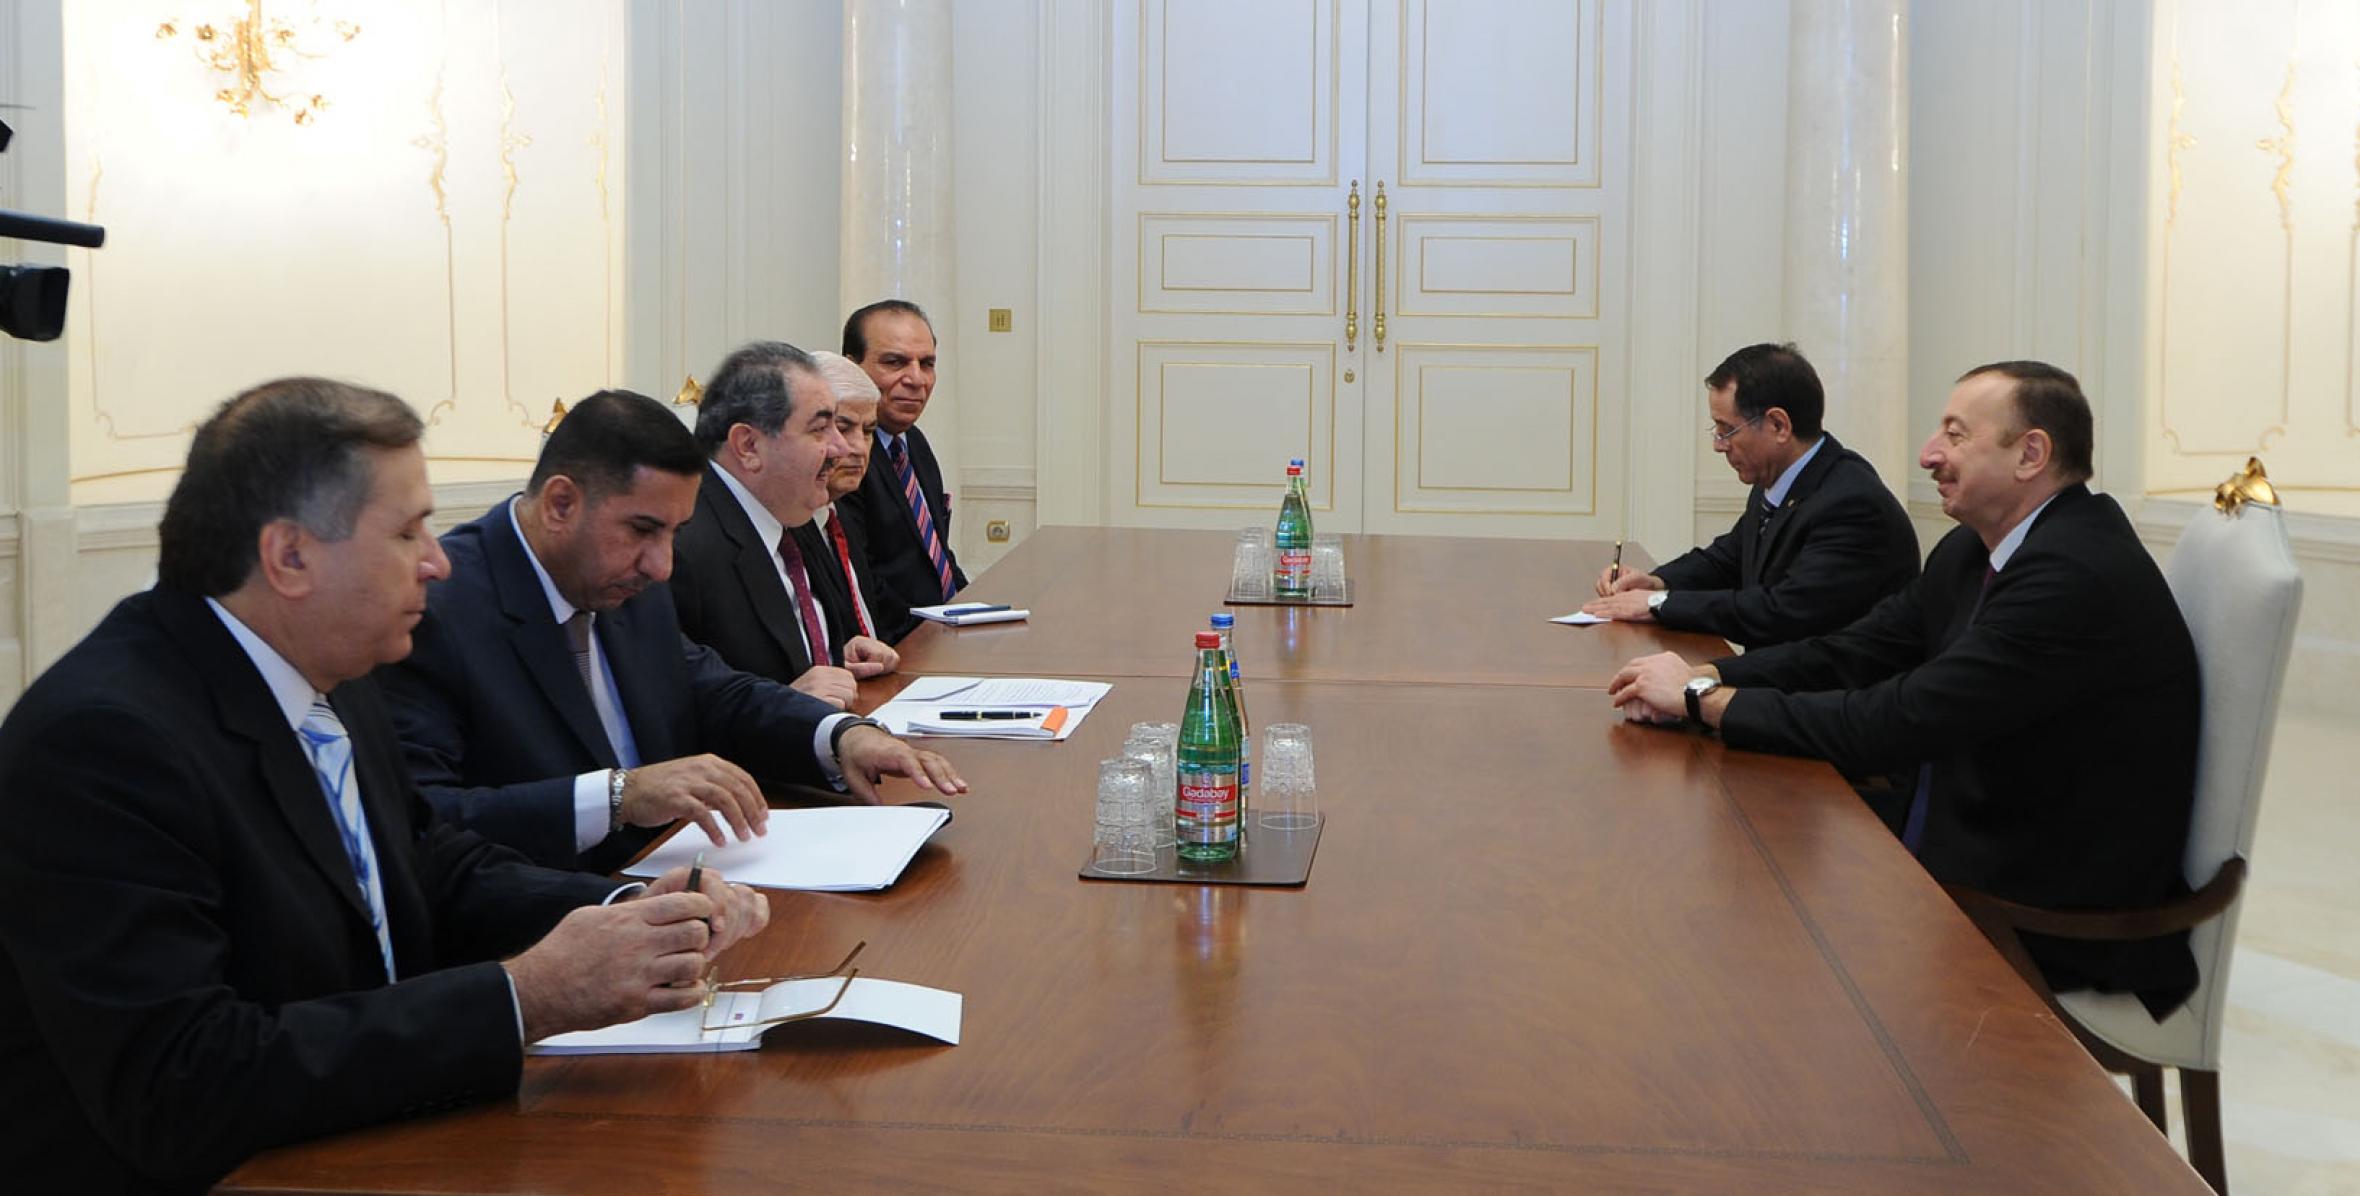 Ilham Aliyev received a delegation led by the Minister of Foreign Affairs of Iraq Hoshyar Zebari